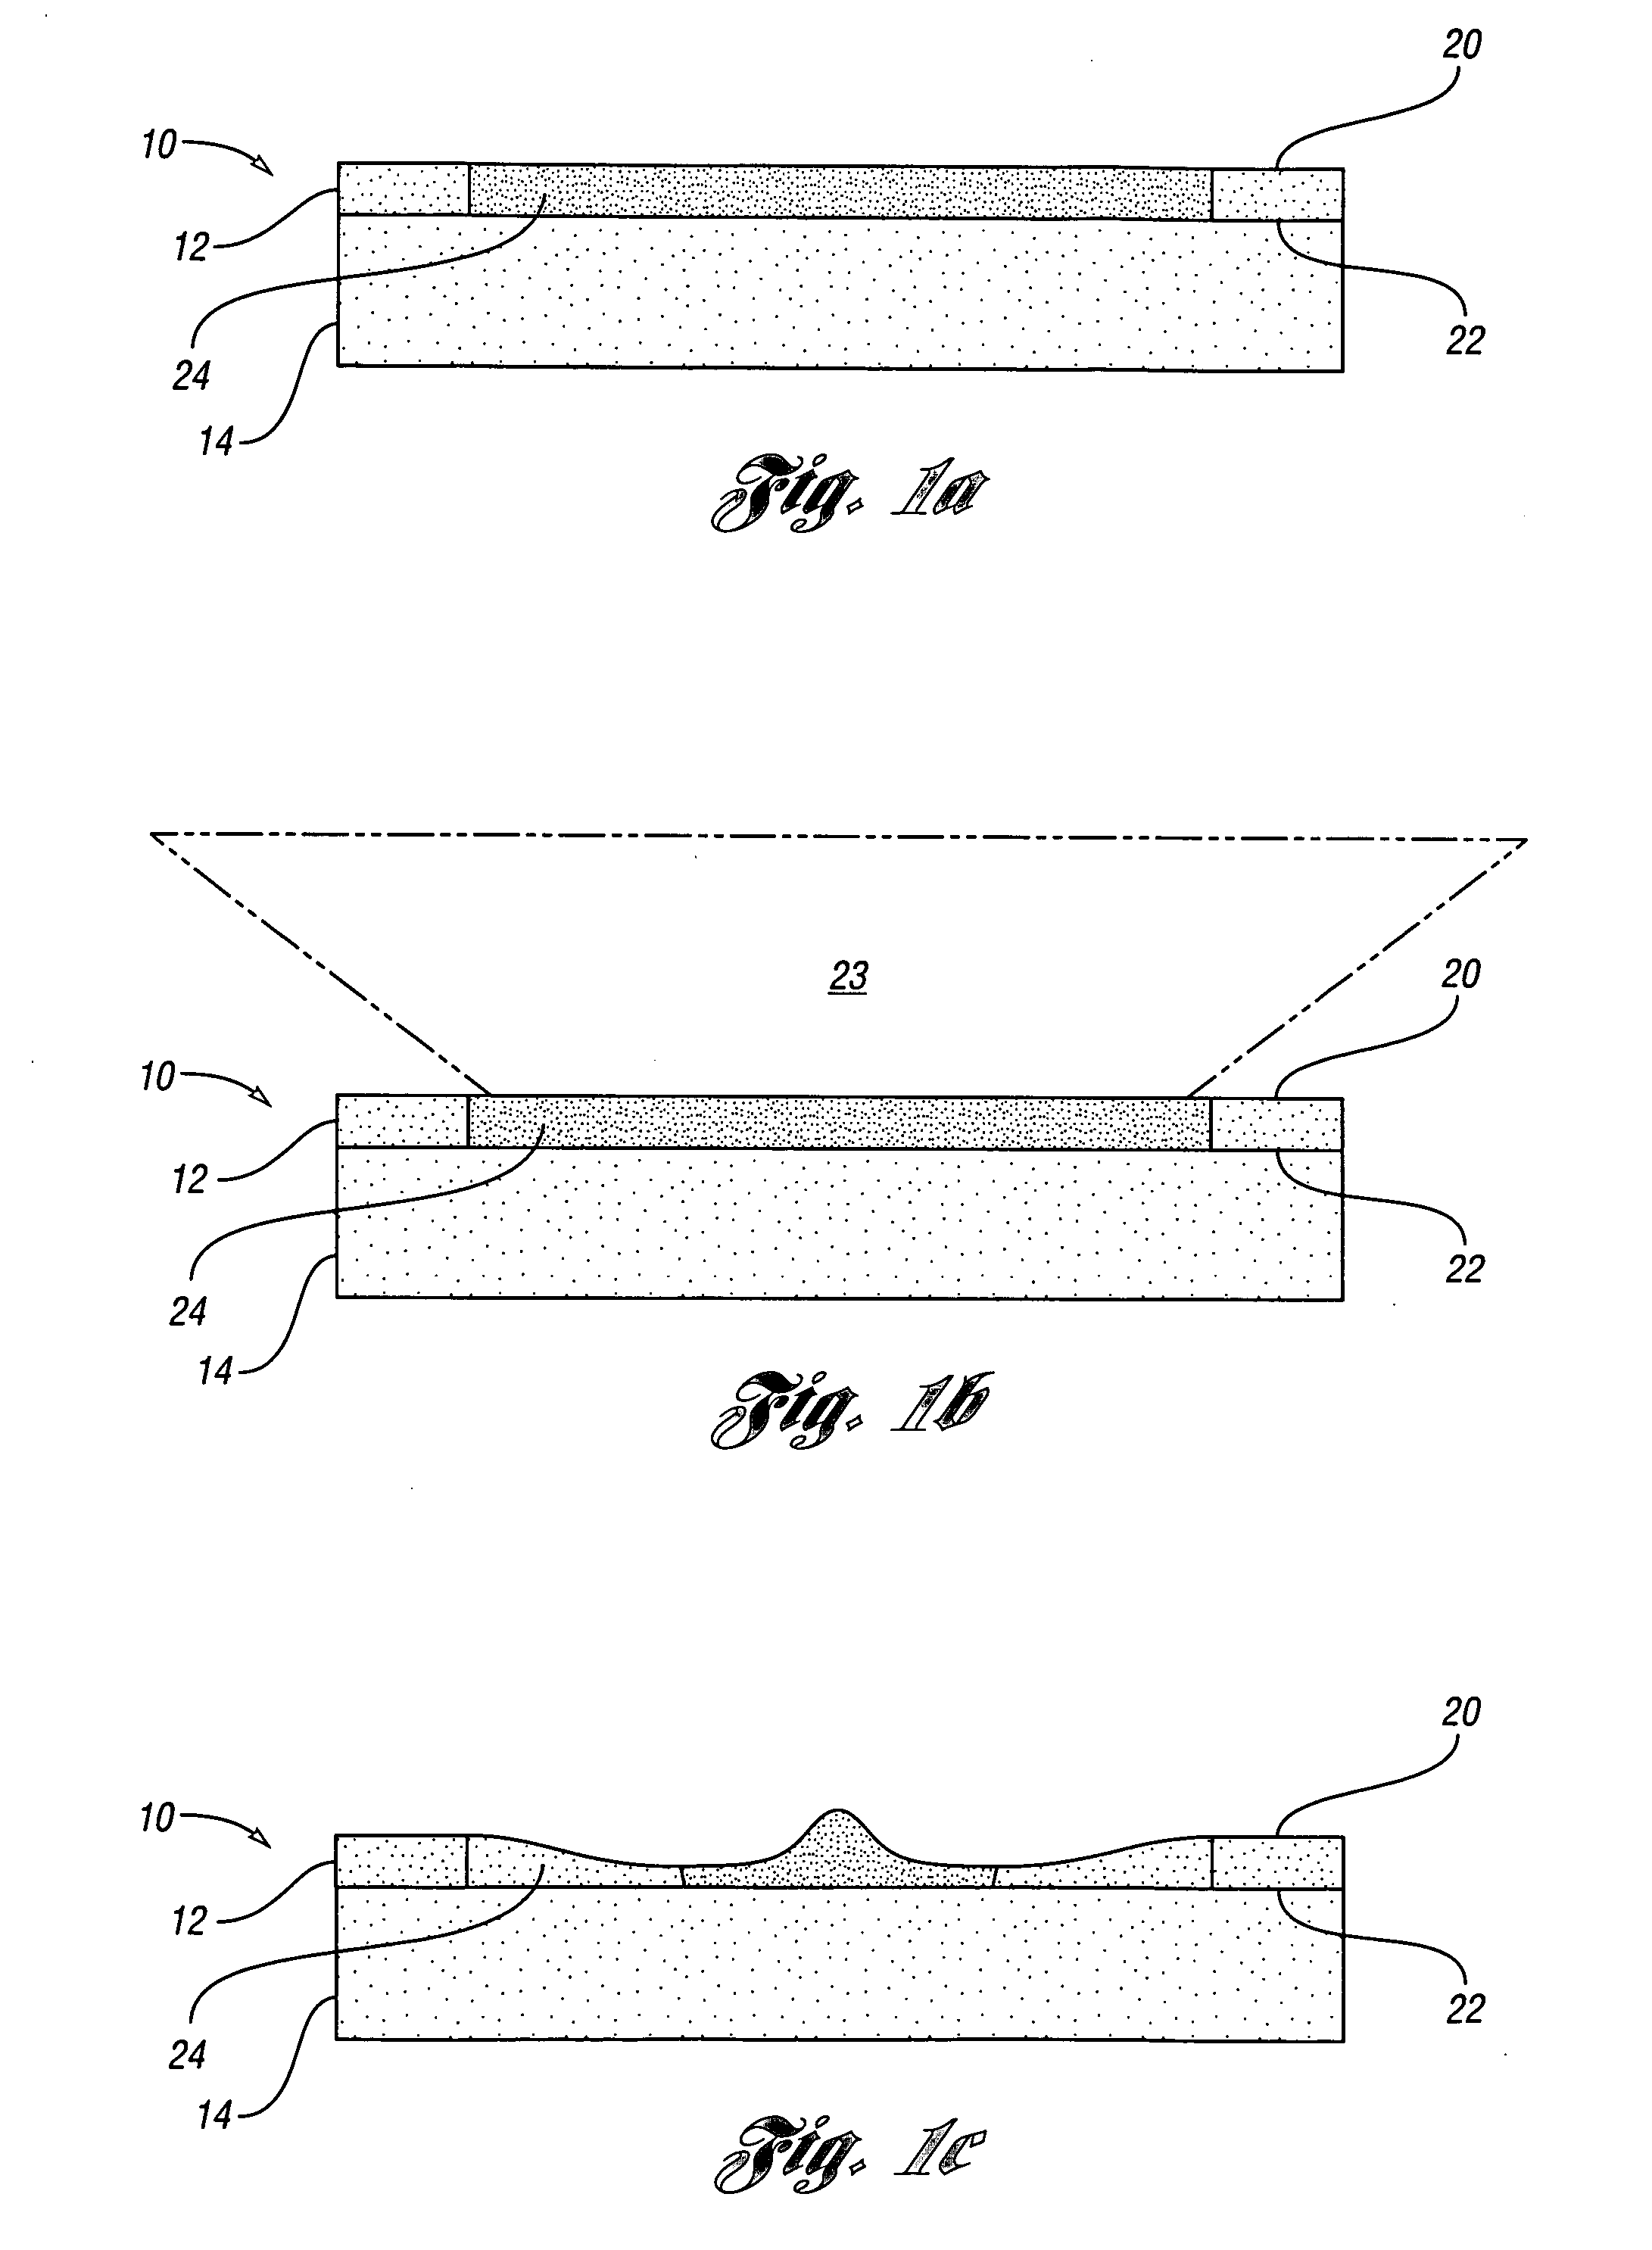 Method of forming micro-structures and nano-structures